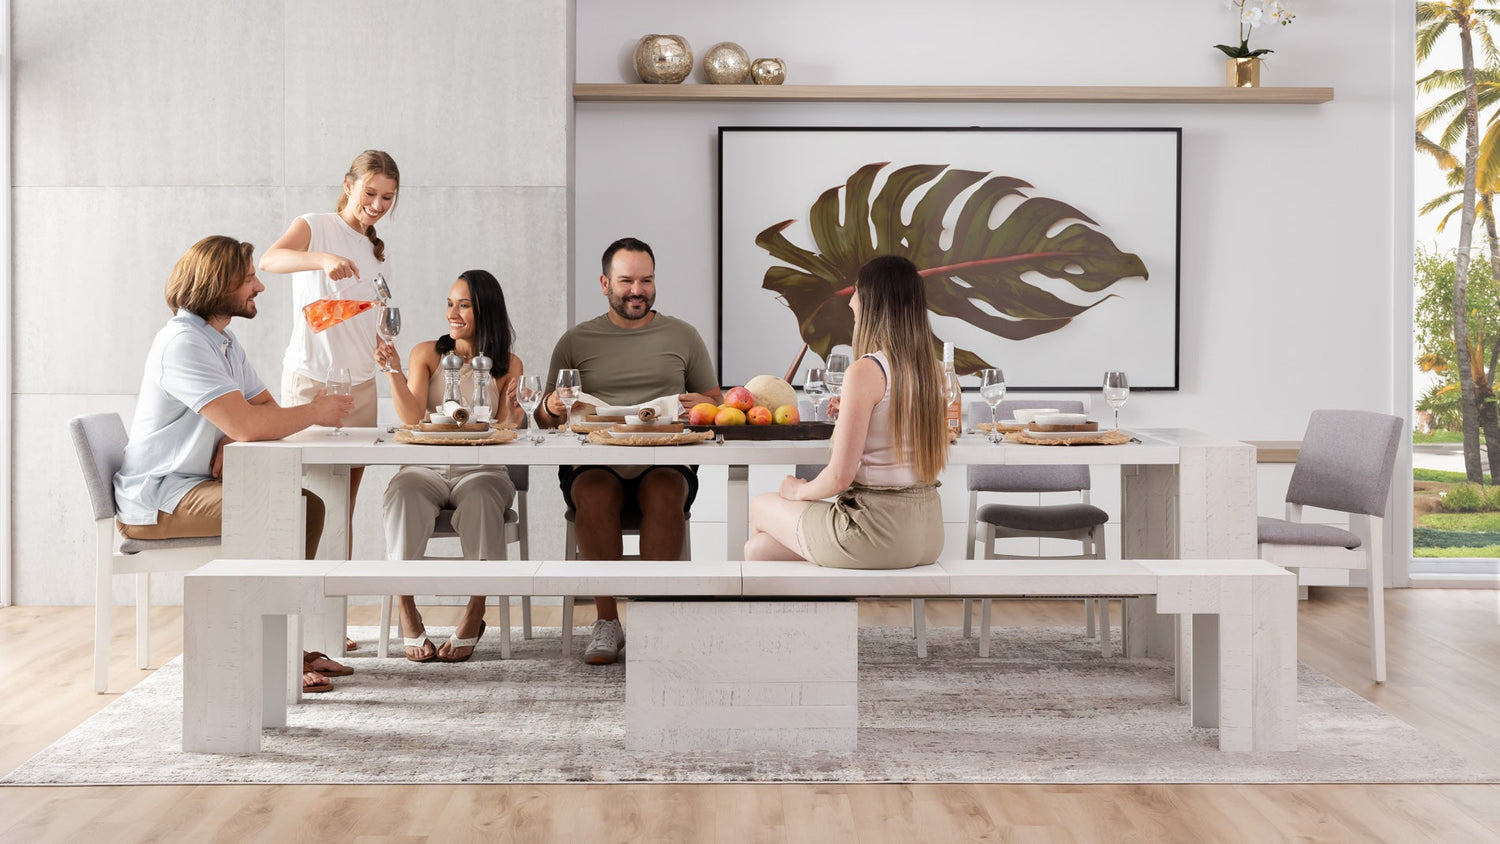 Transformer Table 3.0: A 6-in-1 Table for Every Home, and Every Family